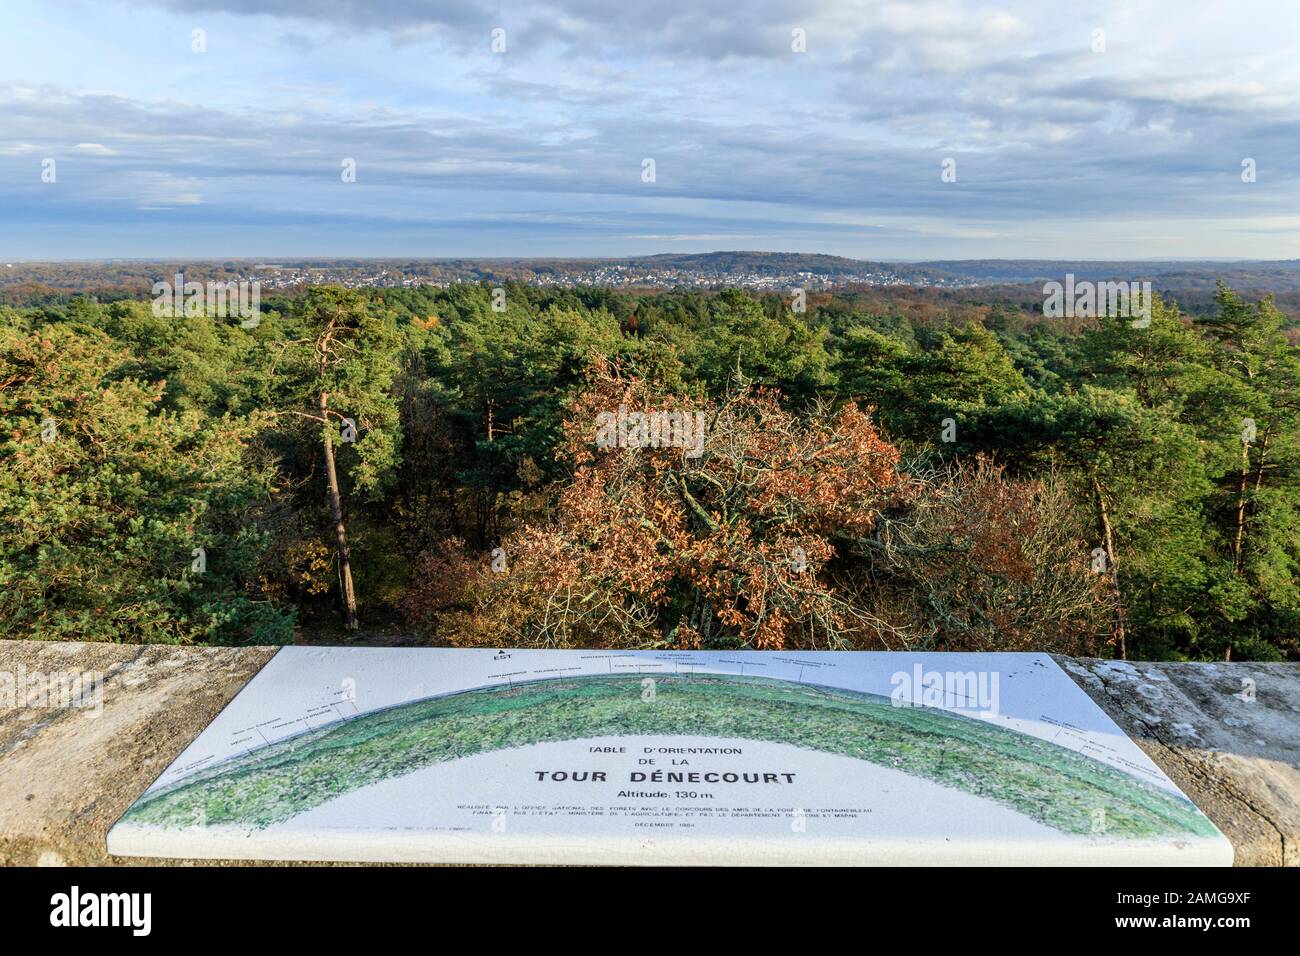 France, Seine et Marne, Fontainebleau, Fontainebleau forest, Fontainebleau and Gatinais Biosphere Reserve by UNESCO, orientation table and panorama fr Stock Photo